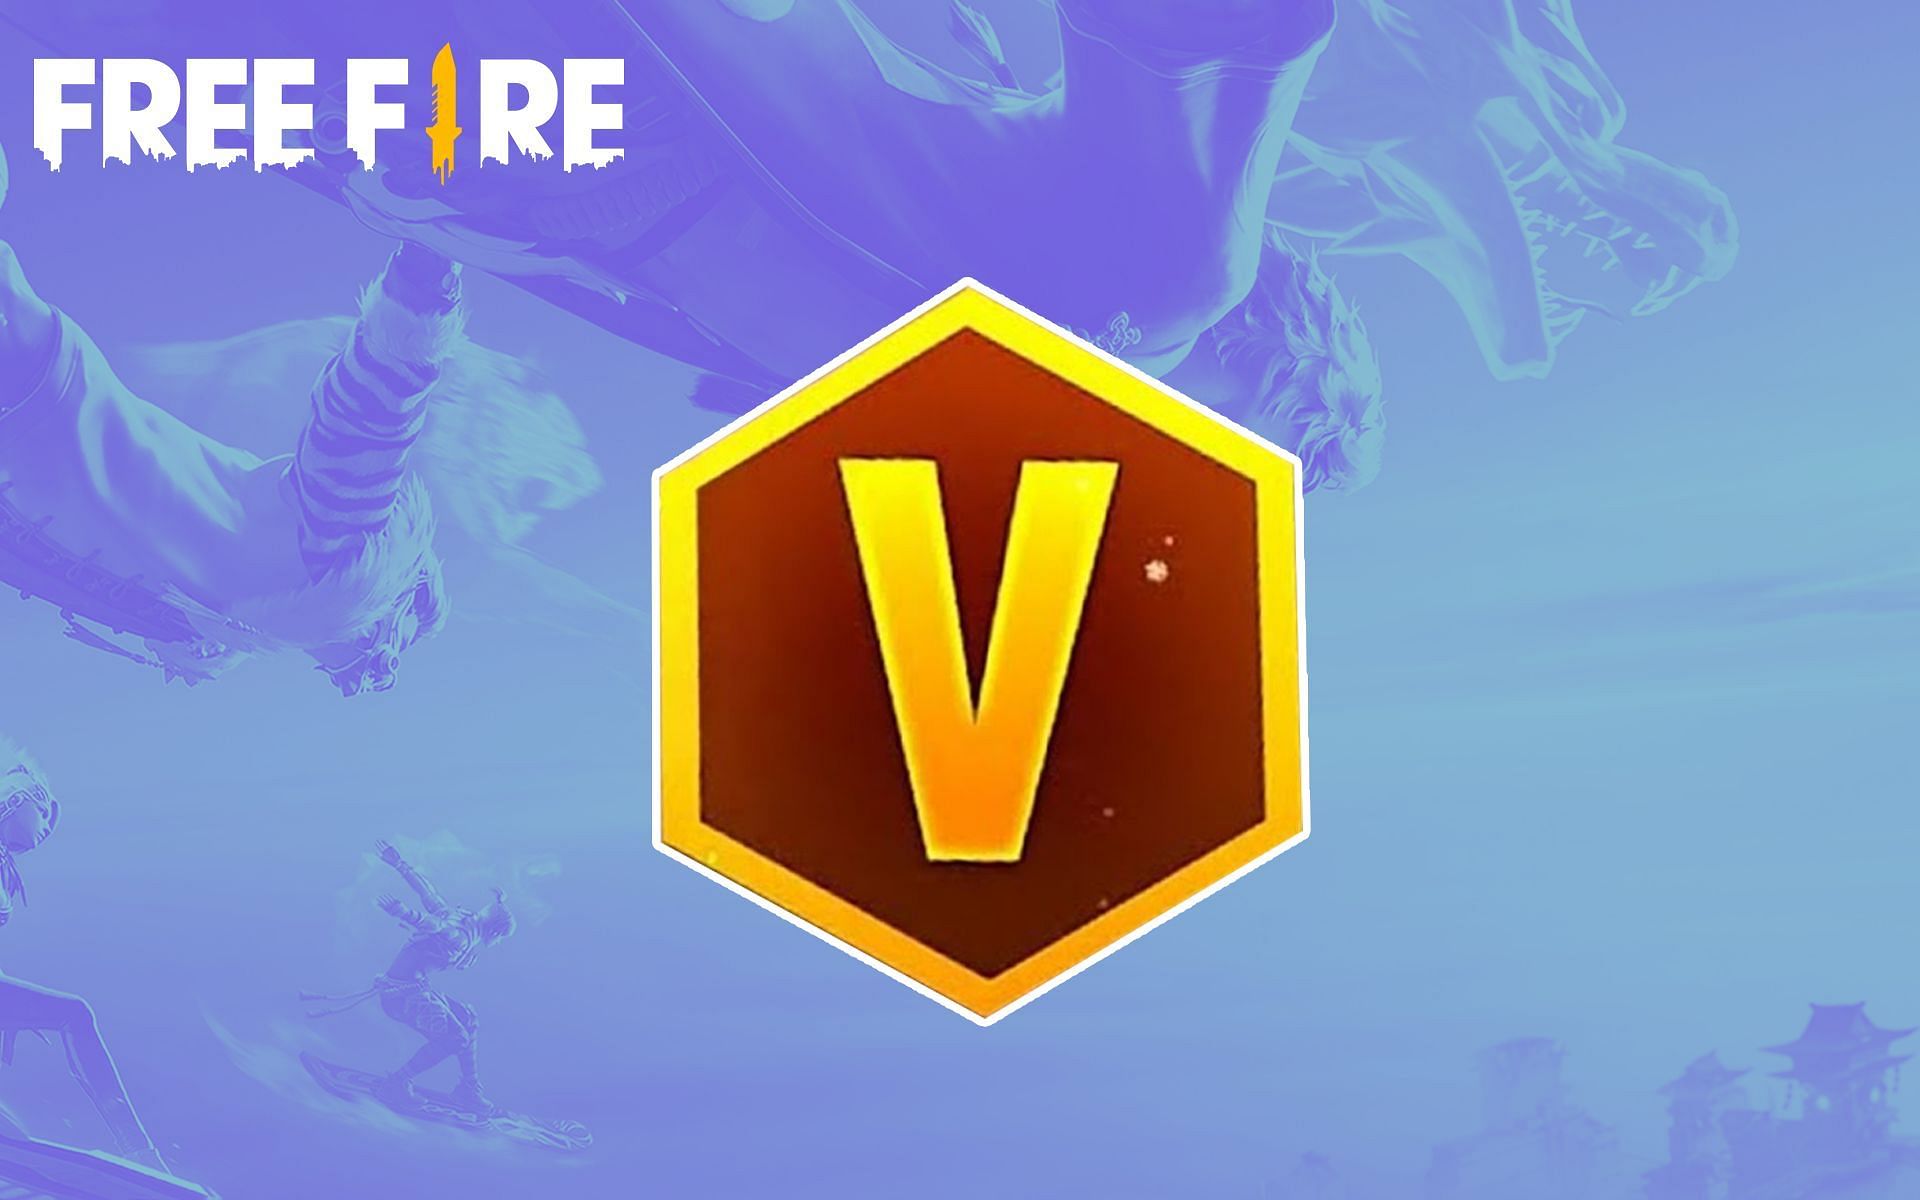 V Badge is exclusive to partners (Image via Free Fire)